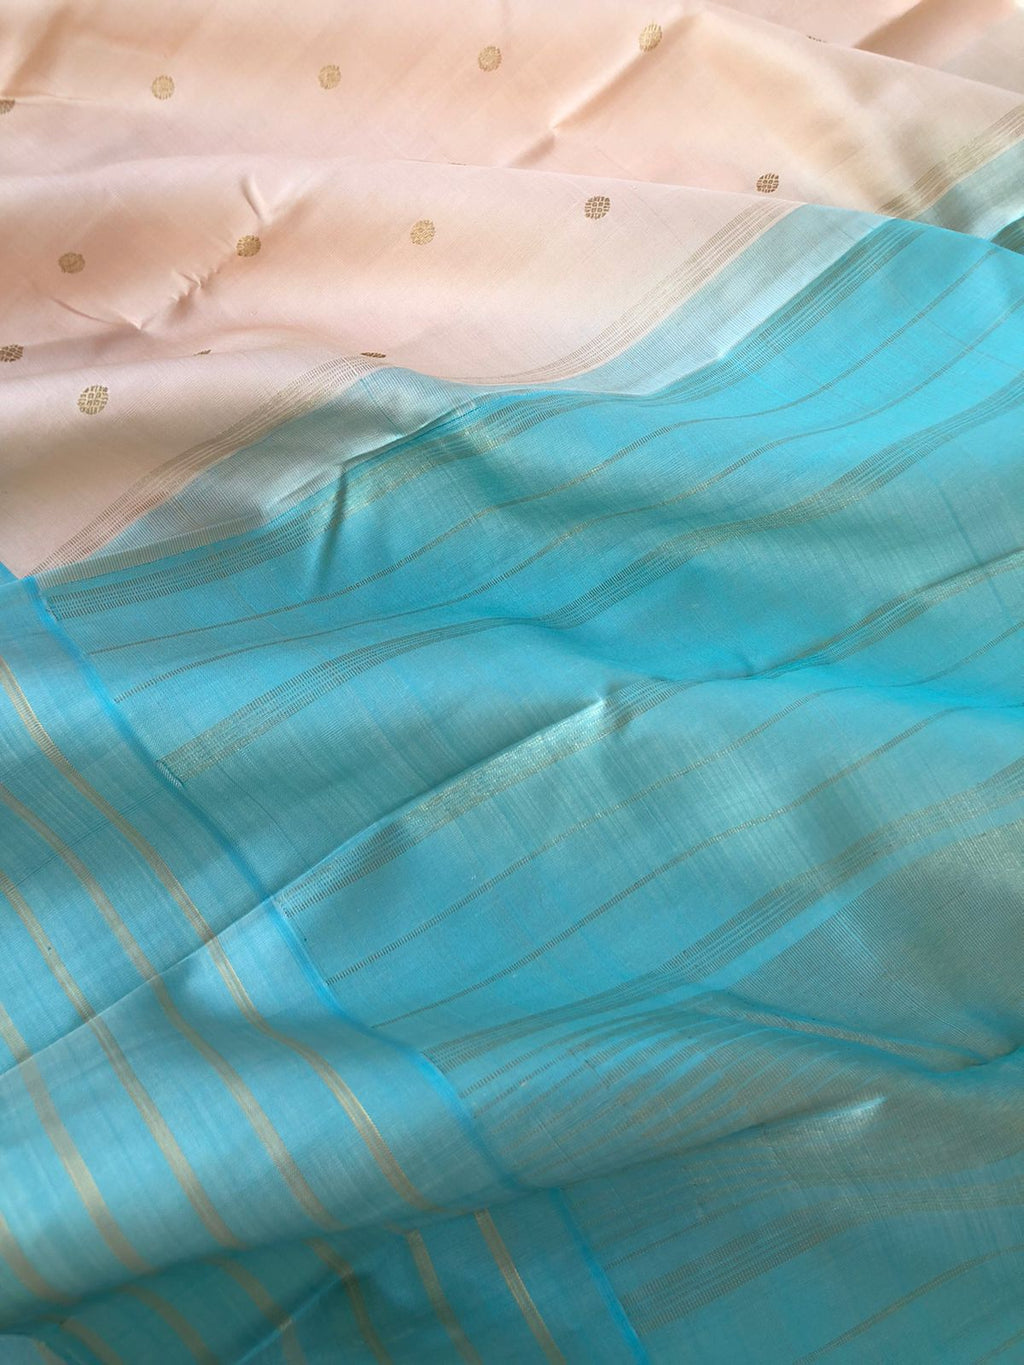 Pastel Ragas on Kanchivaram - most beautiful classy smart pastel off white with a pink of rose gold tone body with baby blue borders pallu and blouse